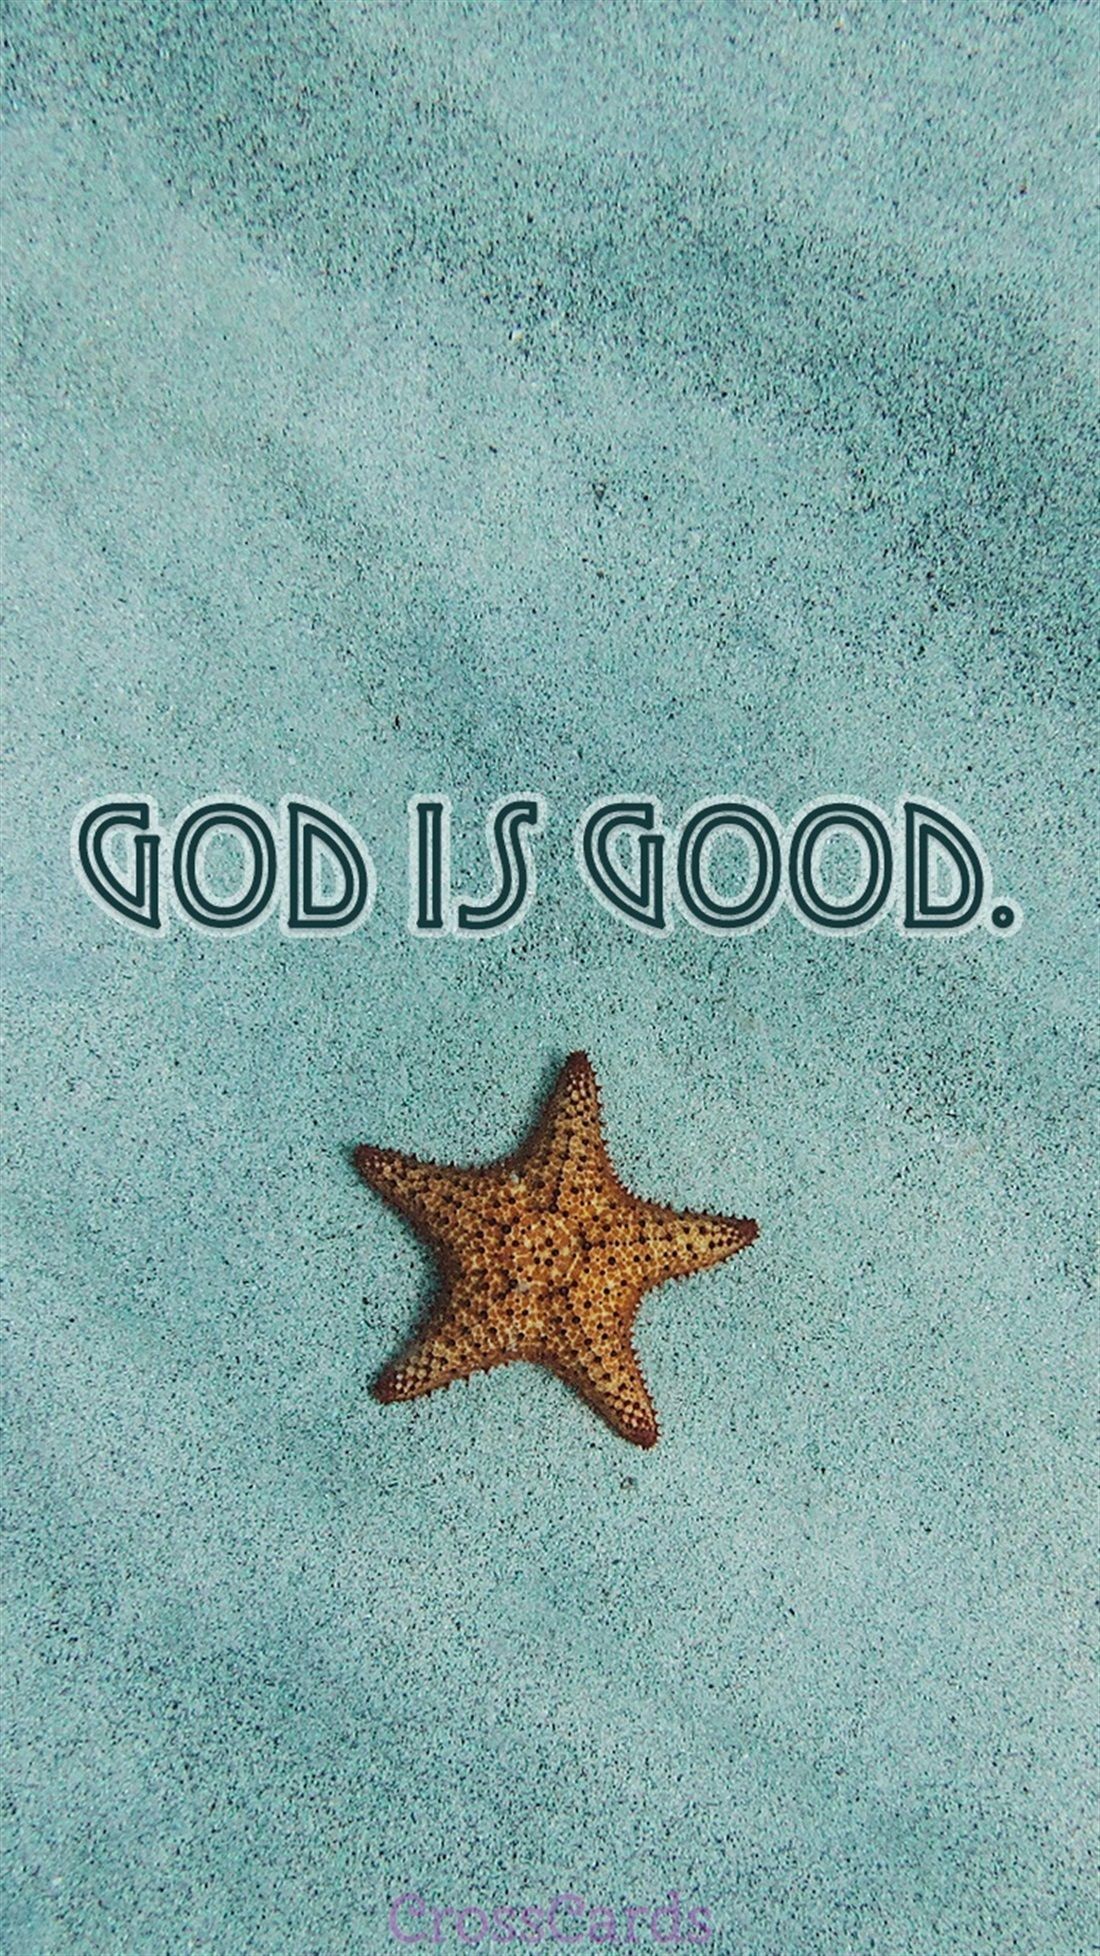 1100x1956 Download this God is Good Desktop Wallpaper Background or choose another  Mobile Wallpaper desktop wallpaper background. We have a large selection of  cool, ...